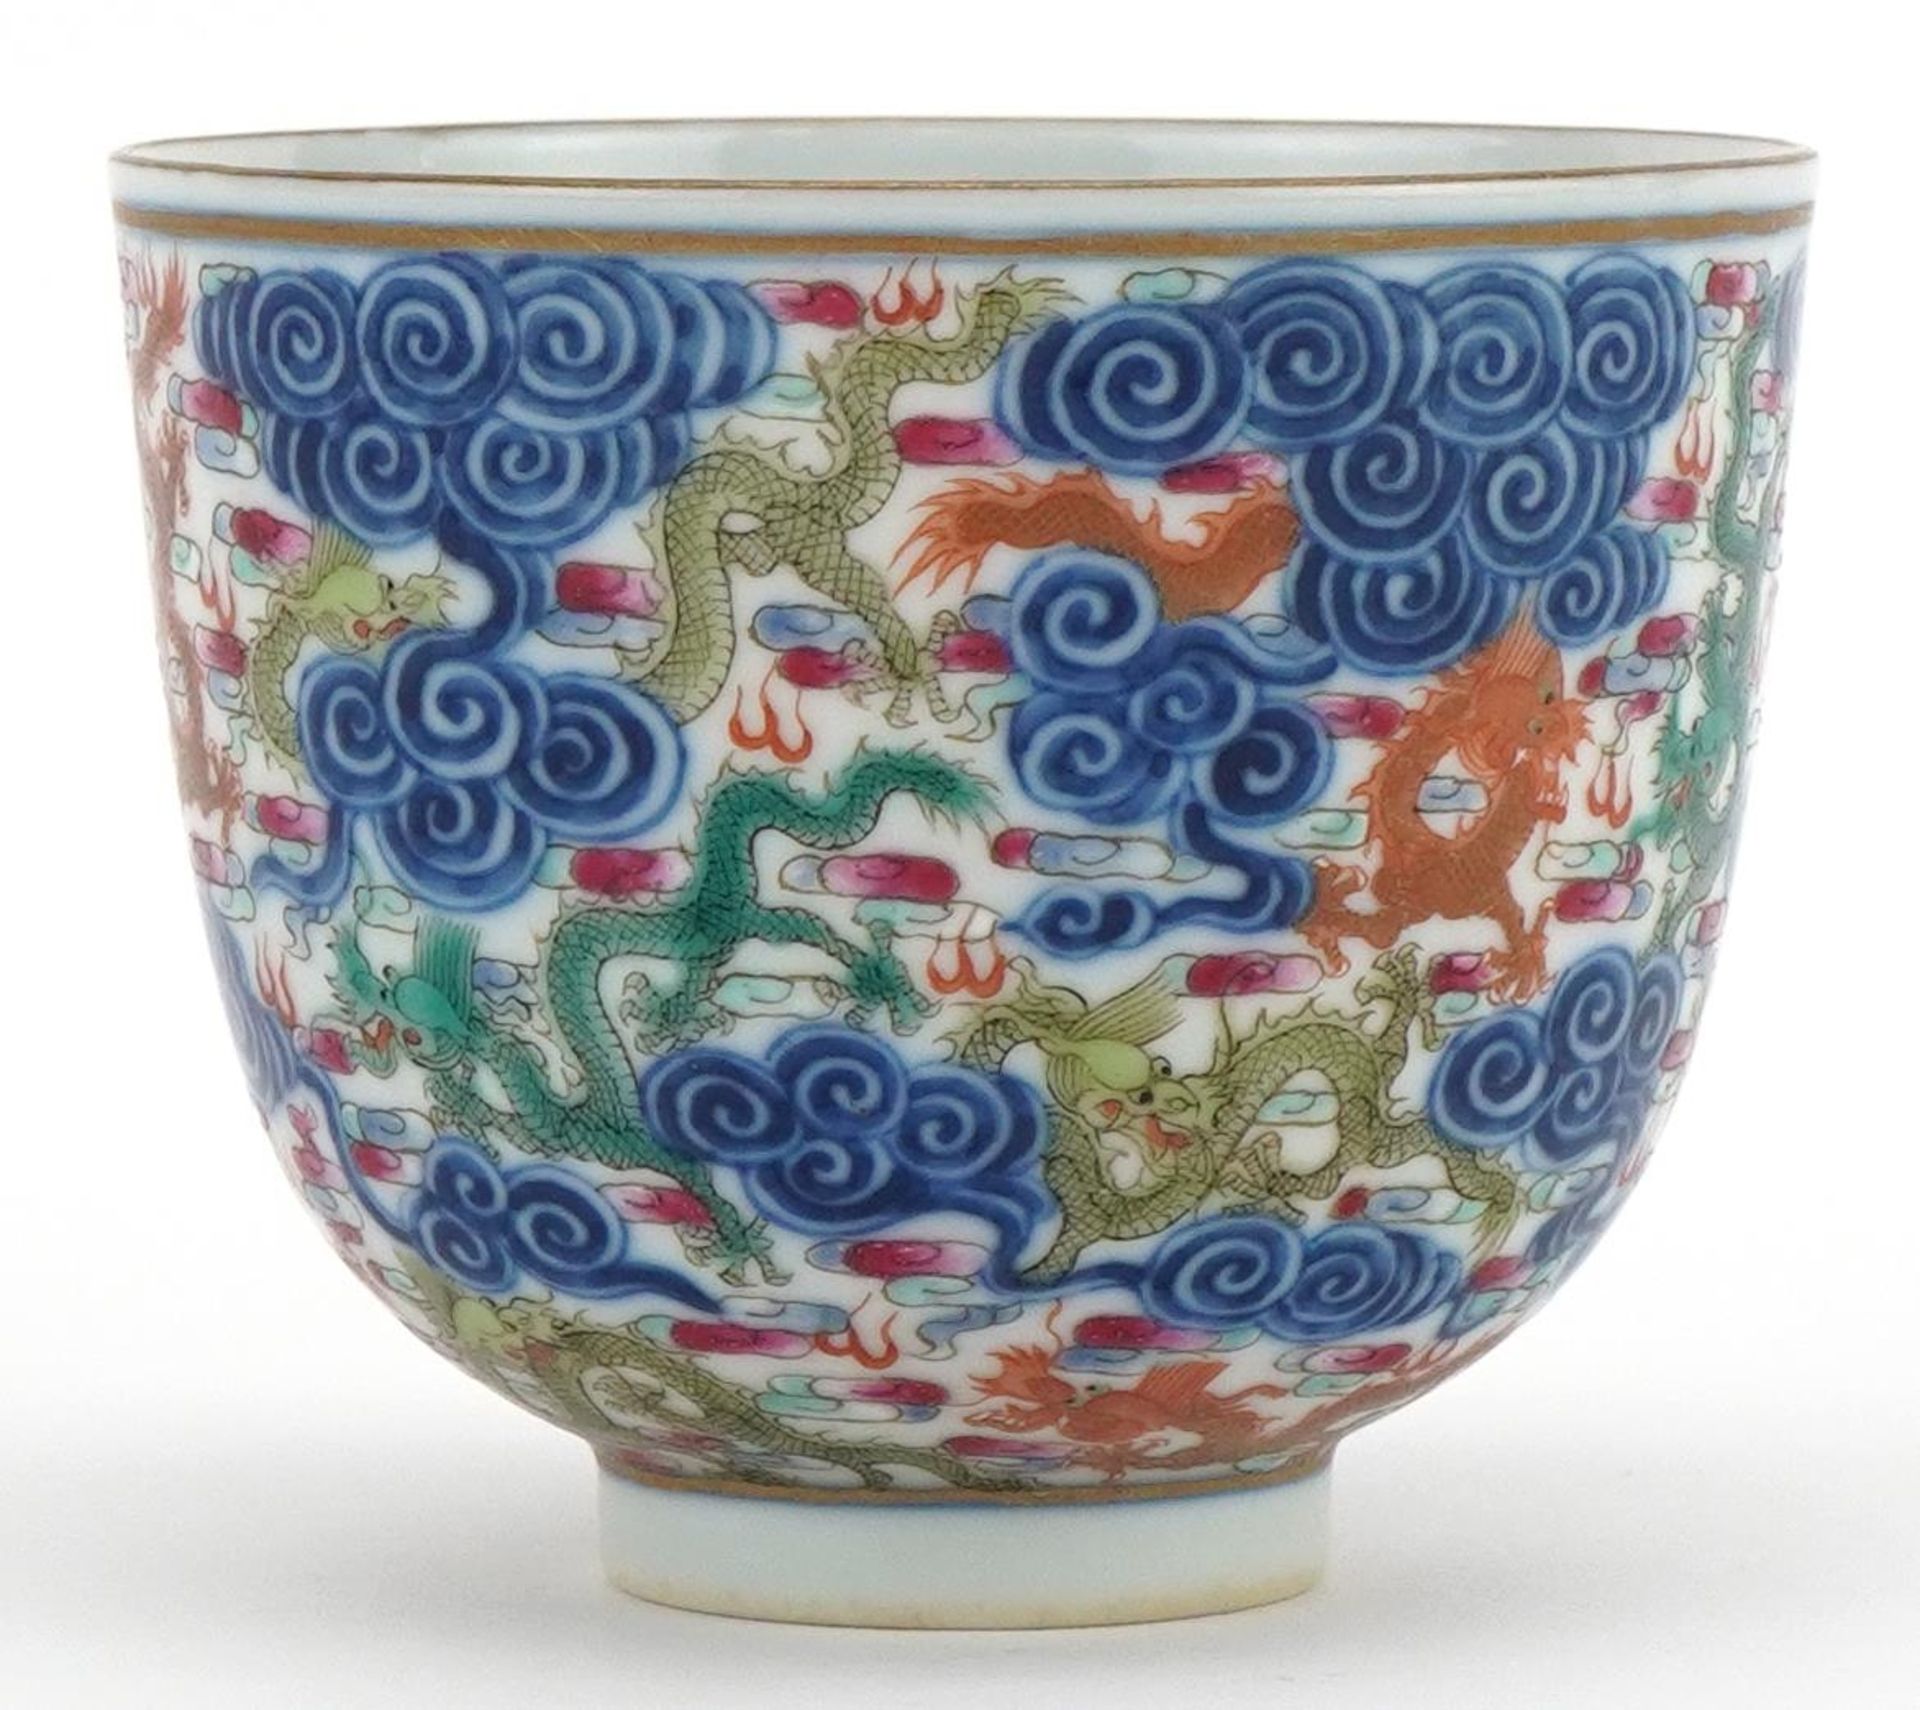 Chinese doucai porcelain tea bowl hand painted with dragons amongst clouds, six figure character - Image 2 of 7